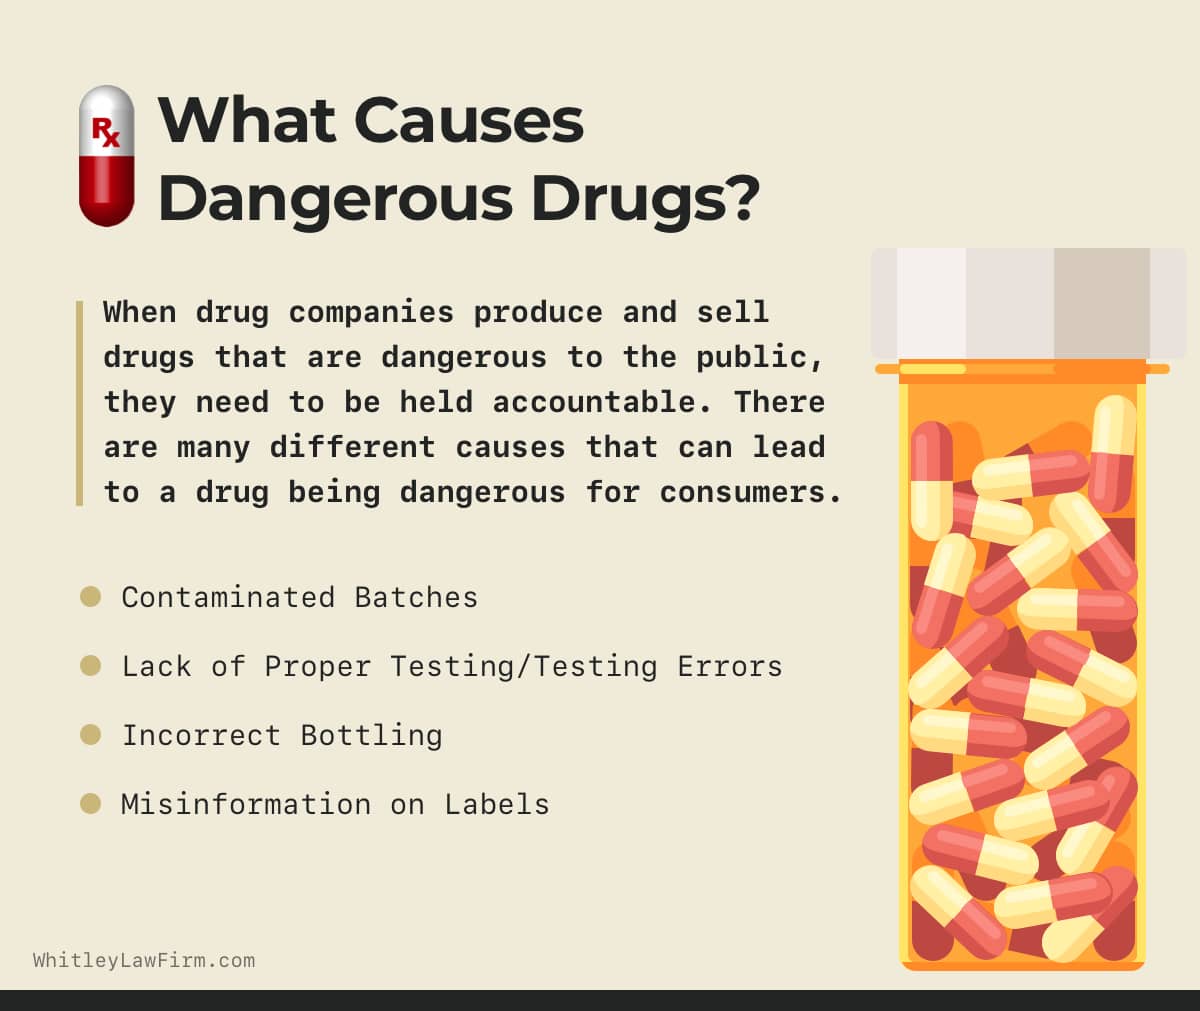 What Makes Some Drugs Dangerous? | Whitley Law Firm